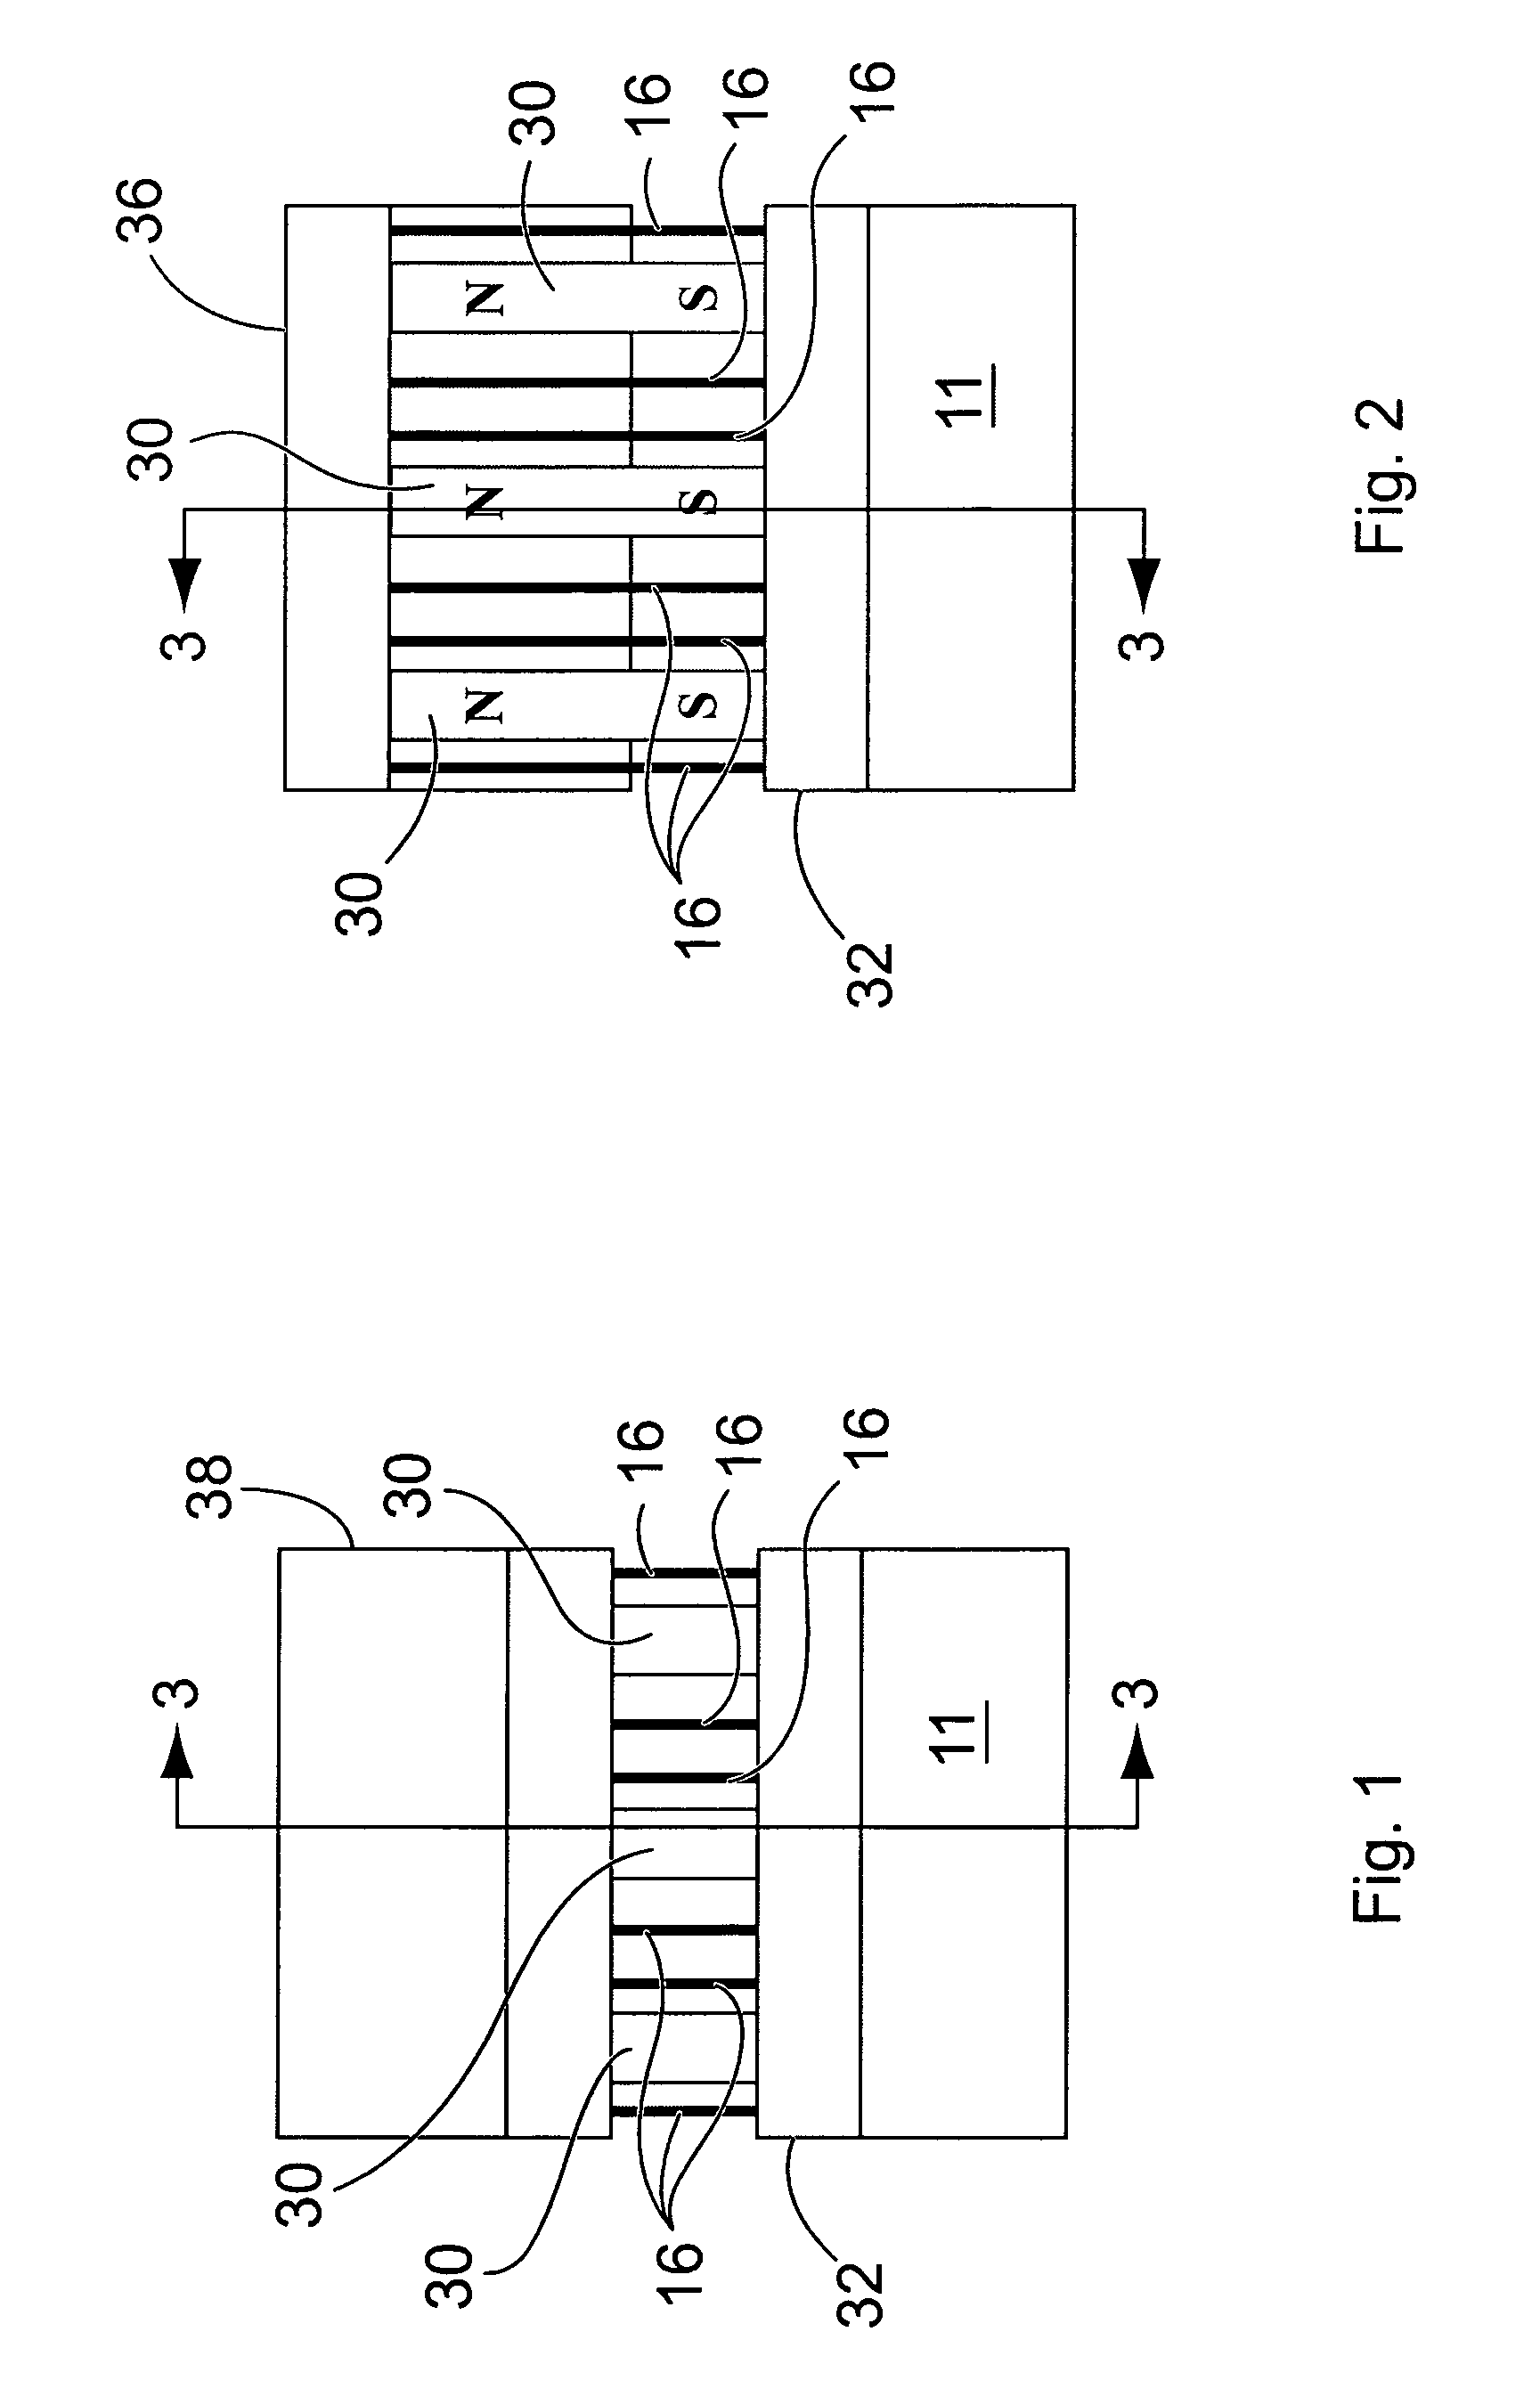 Magnetically enhanced convection heat sink